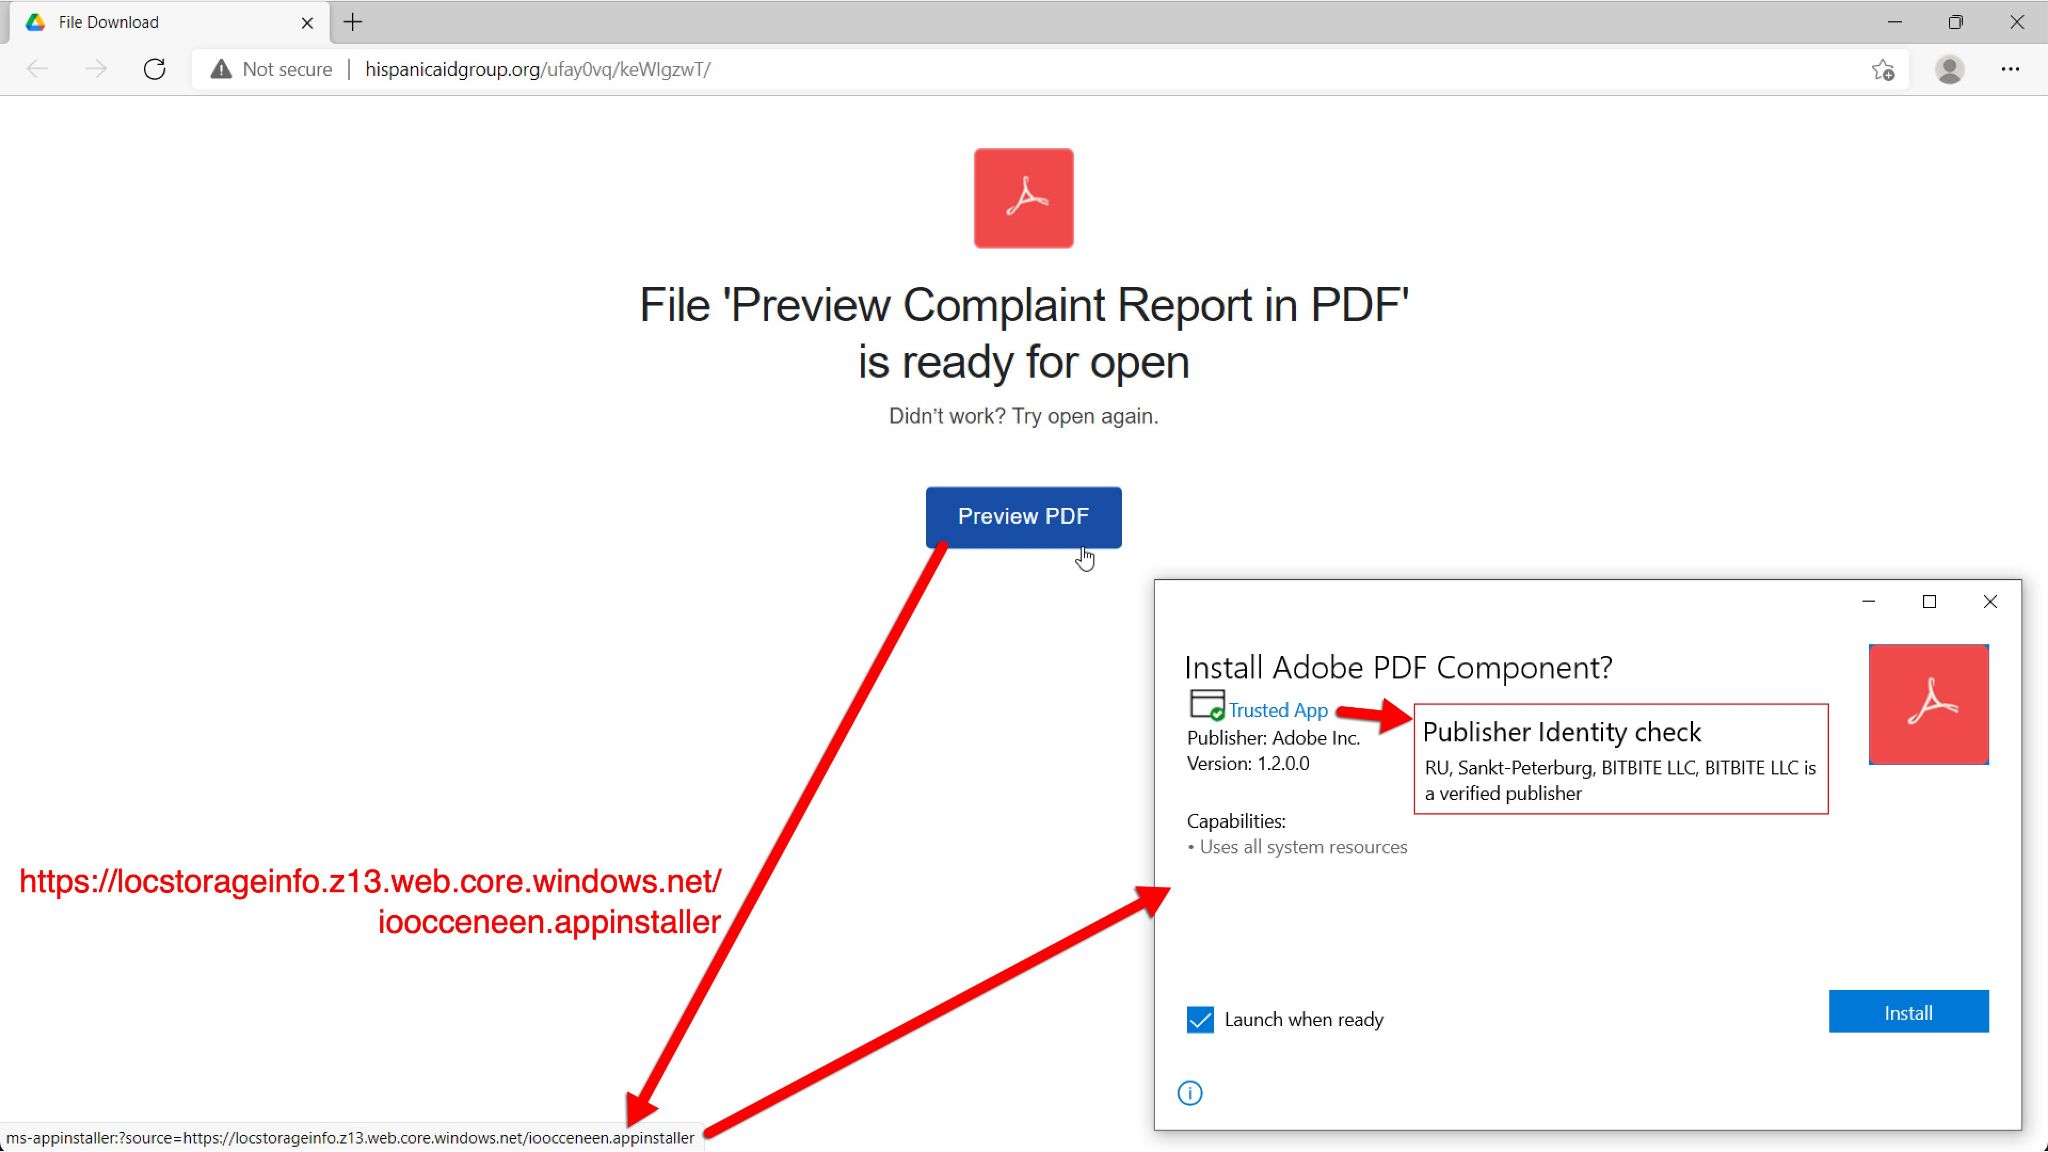 Fake complaint report page links to .appinstaller file for Emotet. Red arrows show what happens if the user clicks the "Preview PDF" button shown in the screenshot. The malicious link that is the actual destination of the button is superimposed over the screenshot in red. 